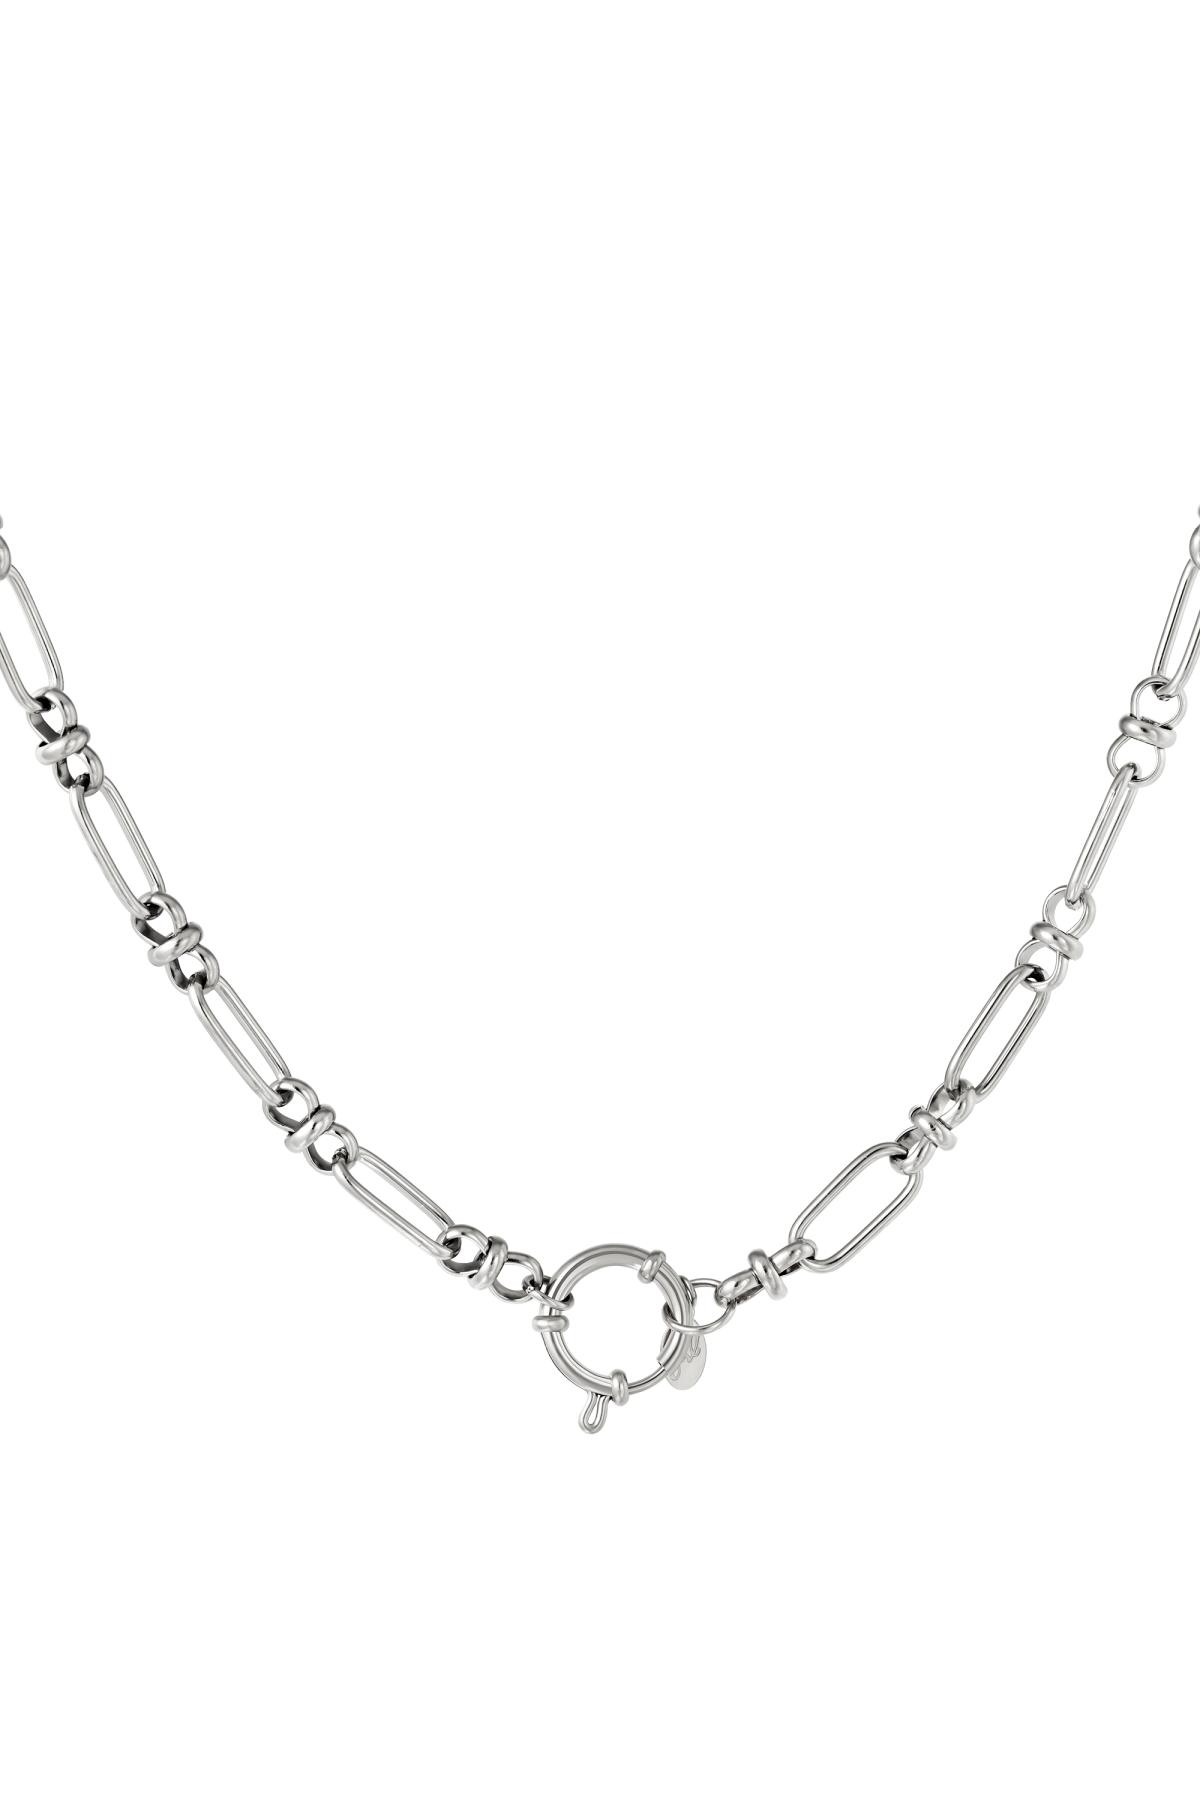 Round closure necklace Silver Stainless Steel h5 